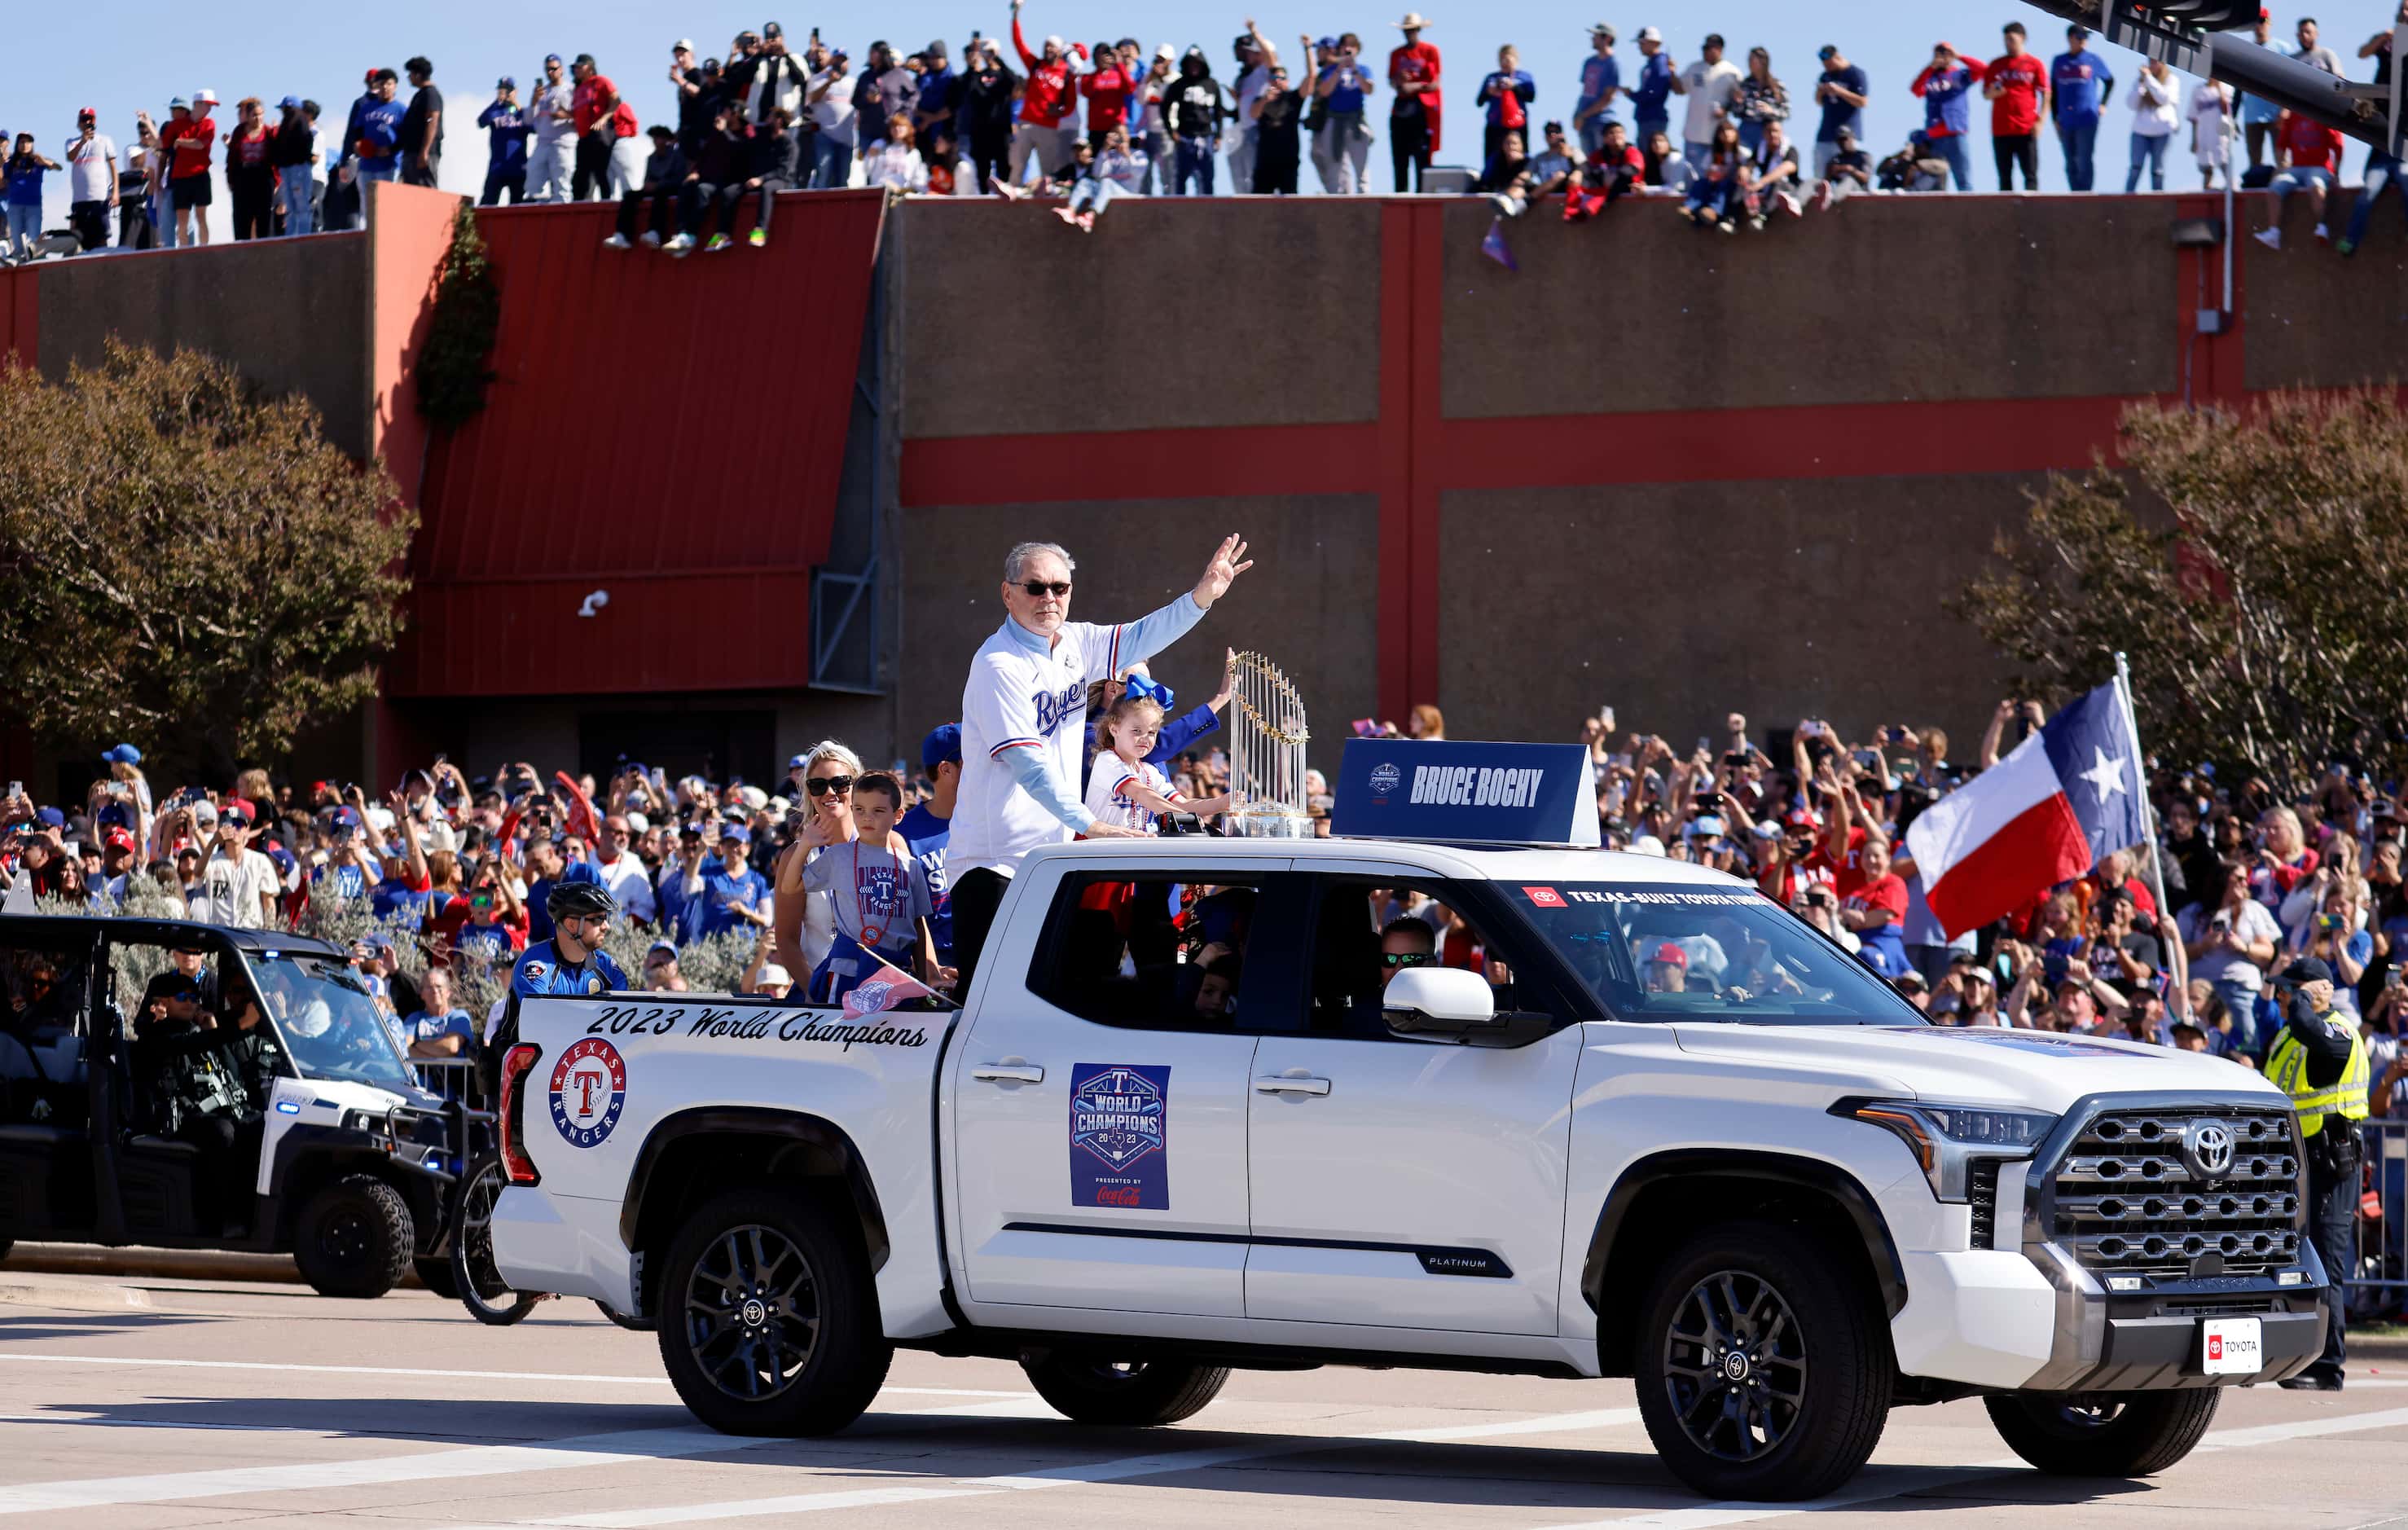 Riding with the World Series trophy, Texas Rangers manager Bruce Bochy waves to fans lining...